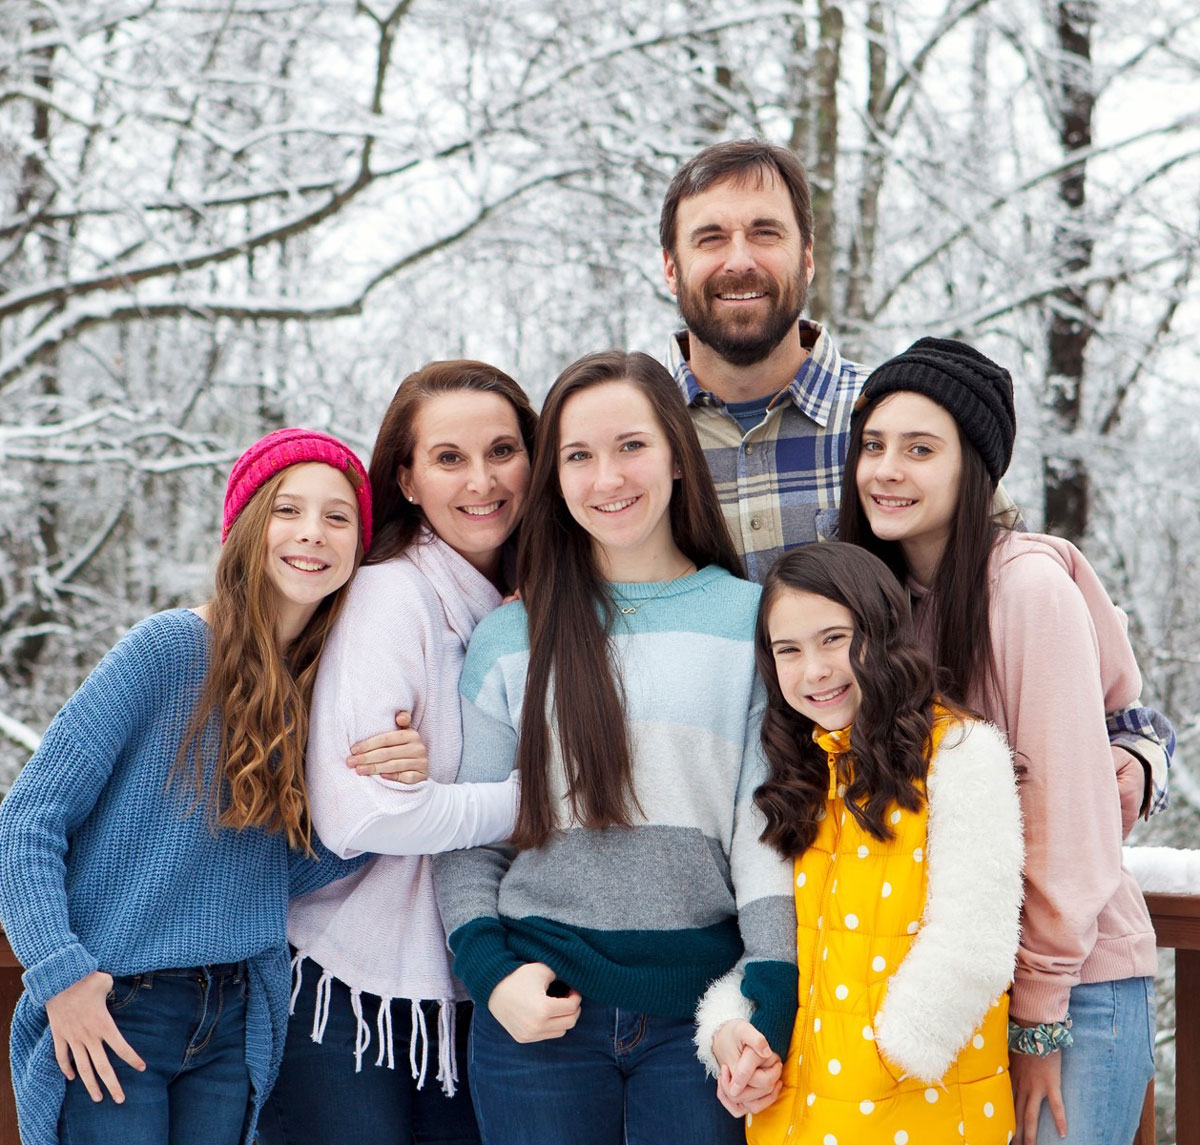 Staci Butt and her family in the snow